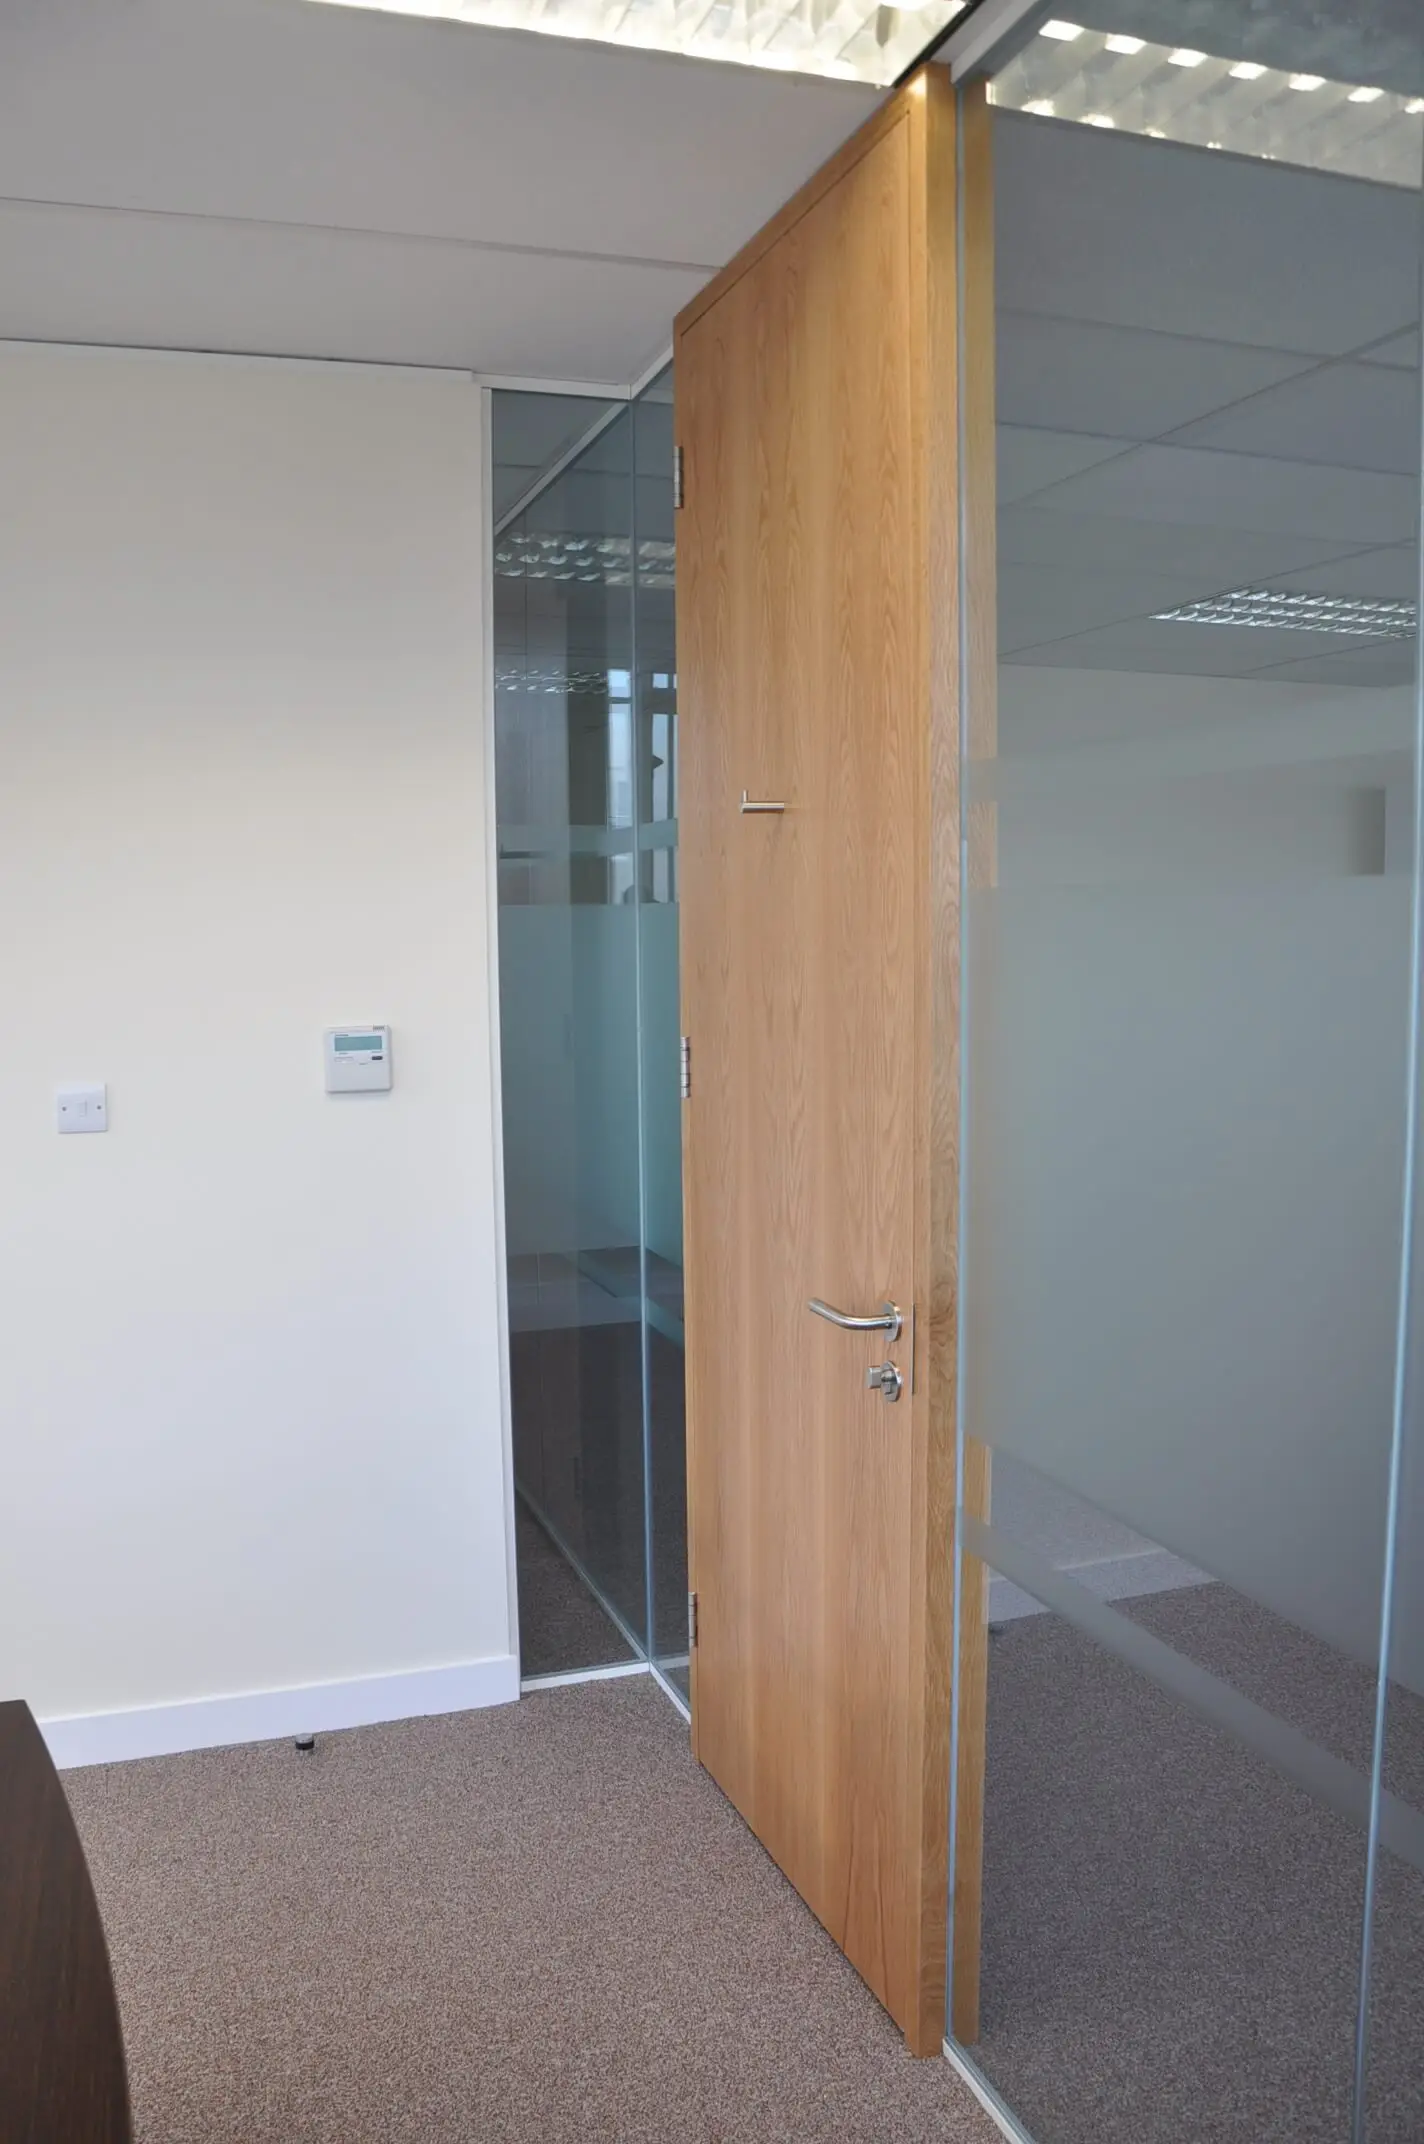 Office space partitioned with glass and solid door